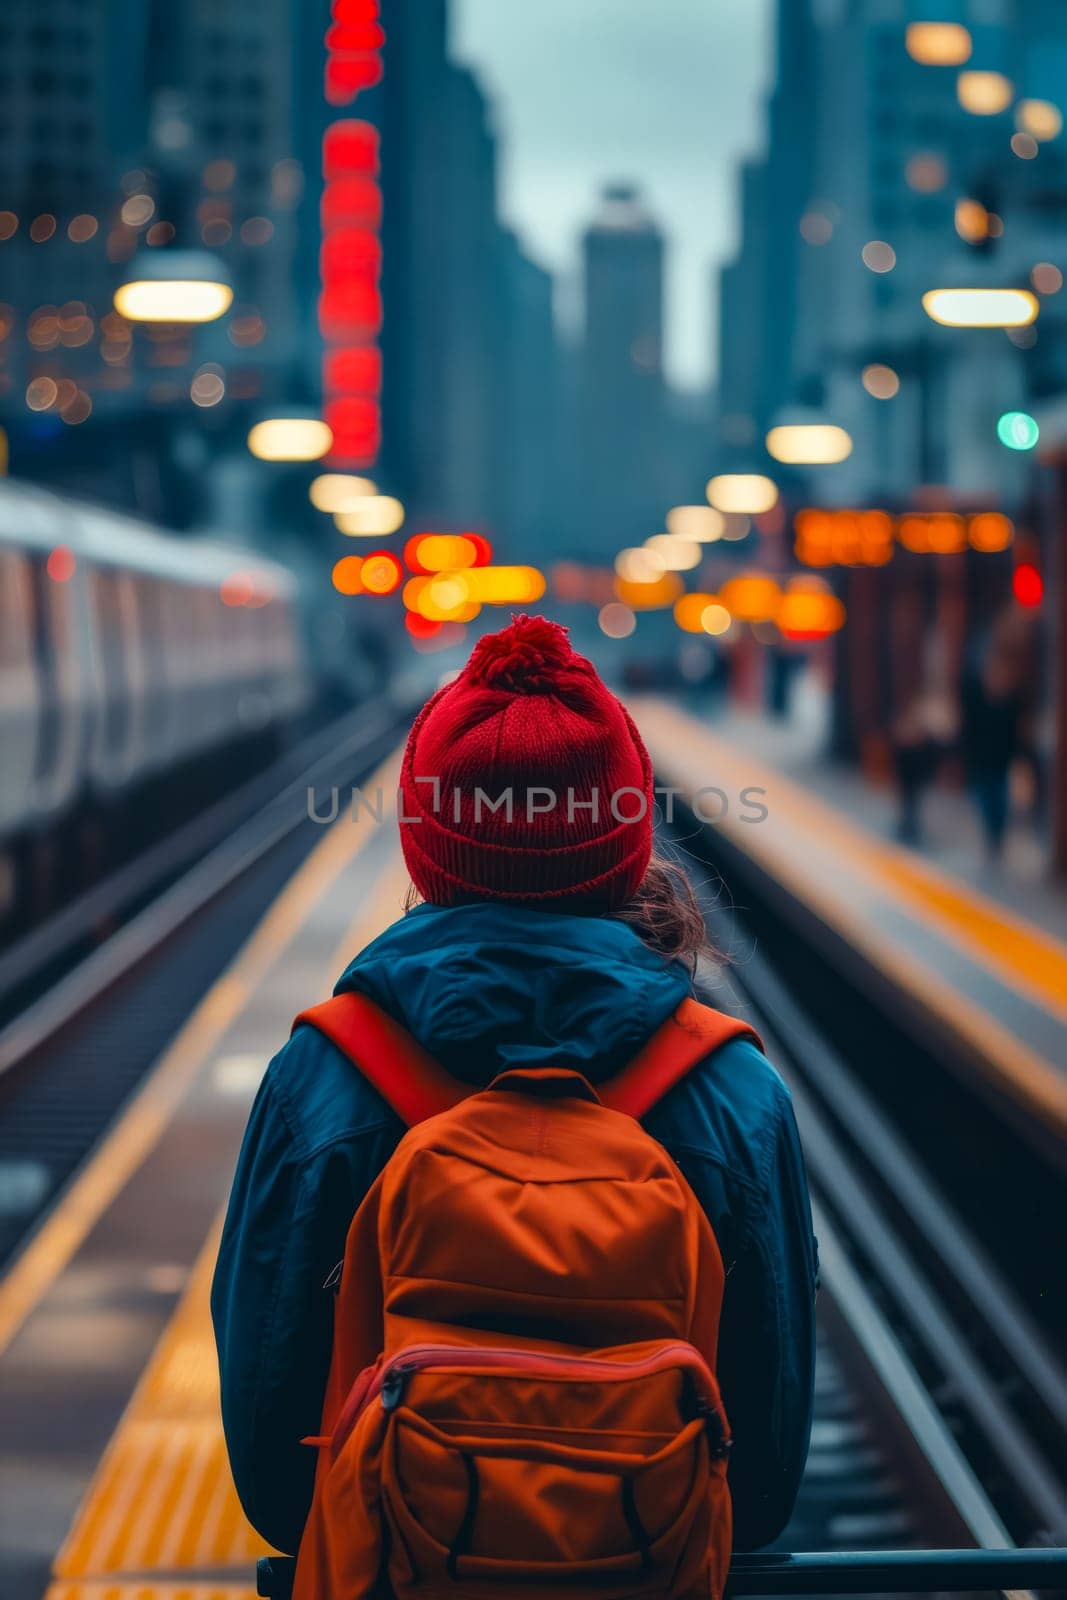 A woman wearing a red hat and carrying a backpack stands on a train platform. The image has a moody, urban feel to it, with the woman's red hat and backpack adding a pop of color to the scene. Generative AI